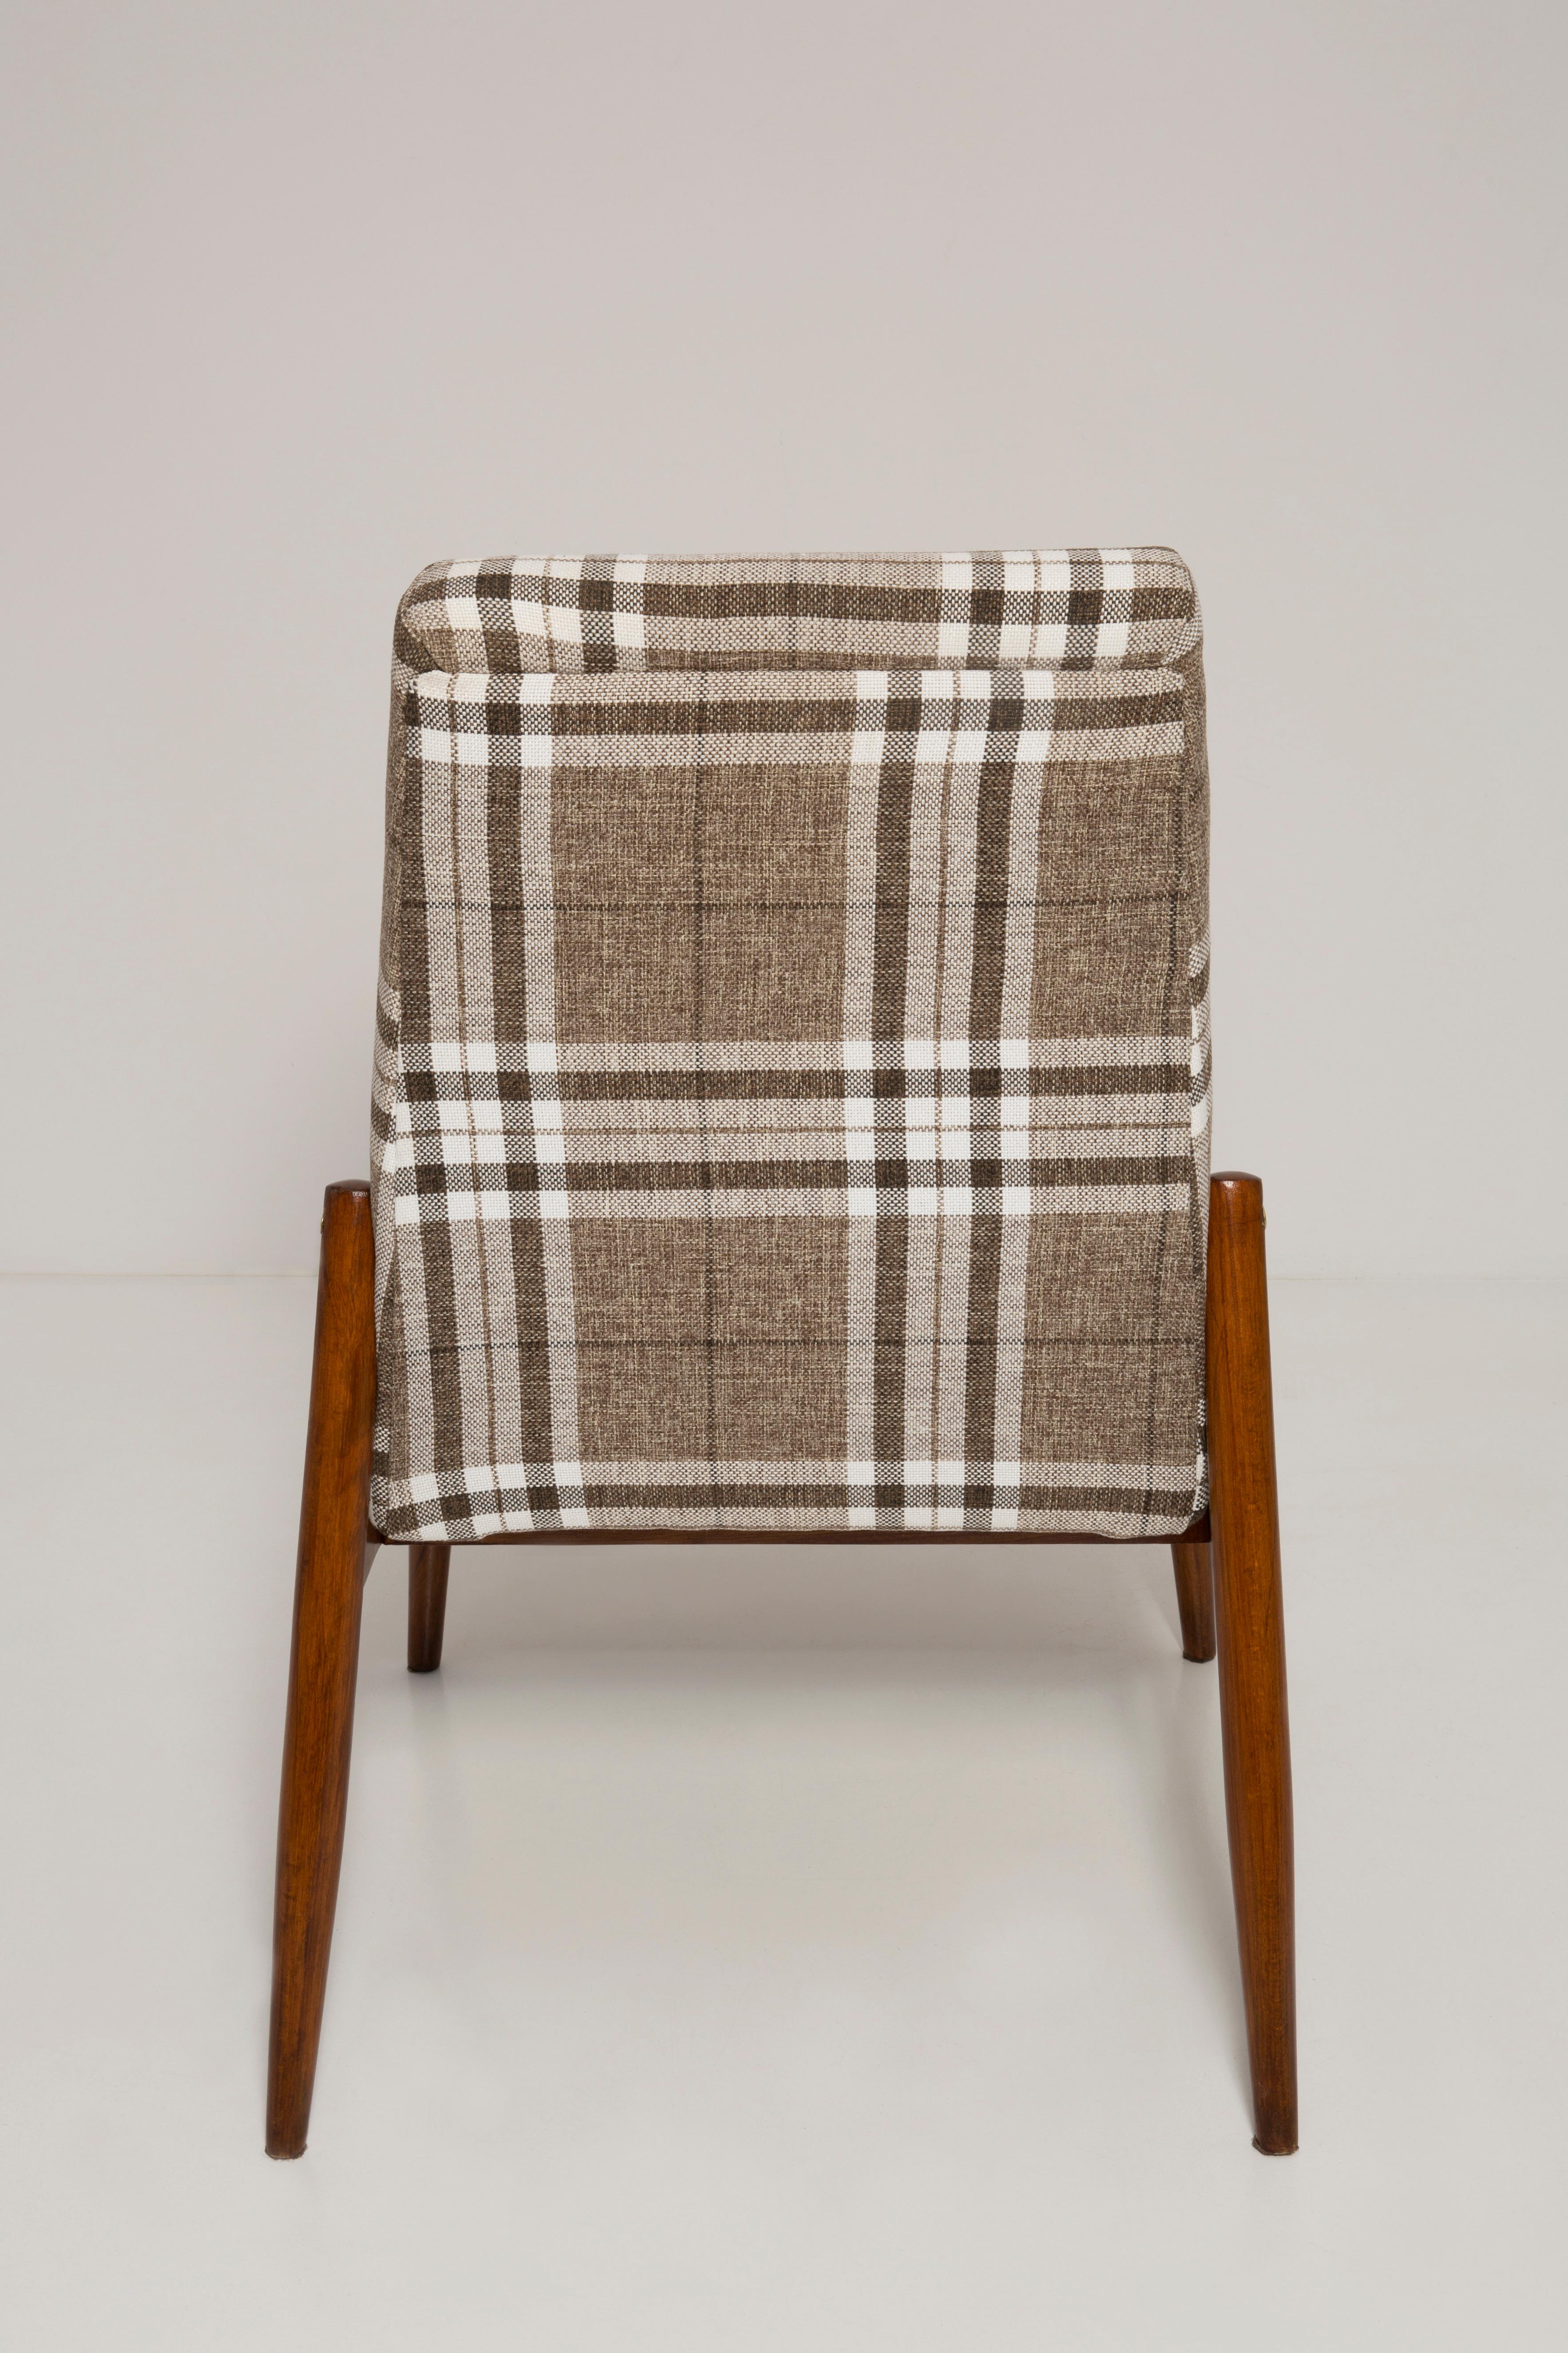 Hand-Crafted Pair of Midcentury Beige Checkered Fabric Armchairs, Europe, 1960s For Sale